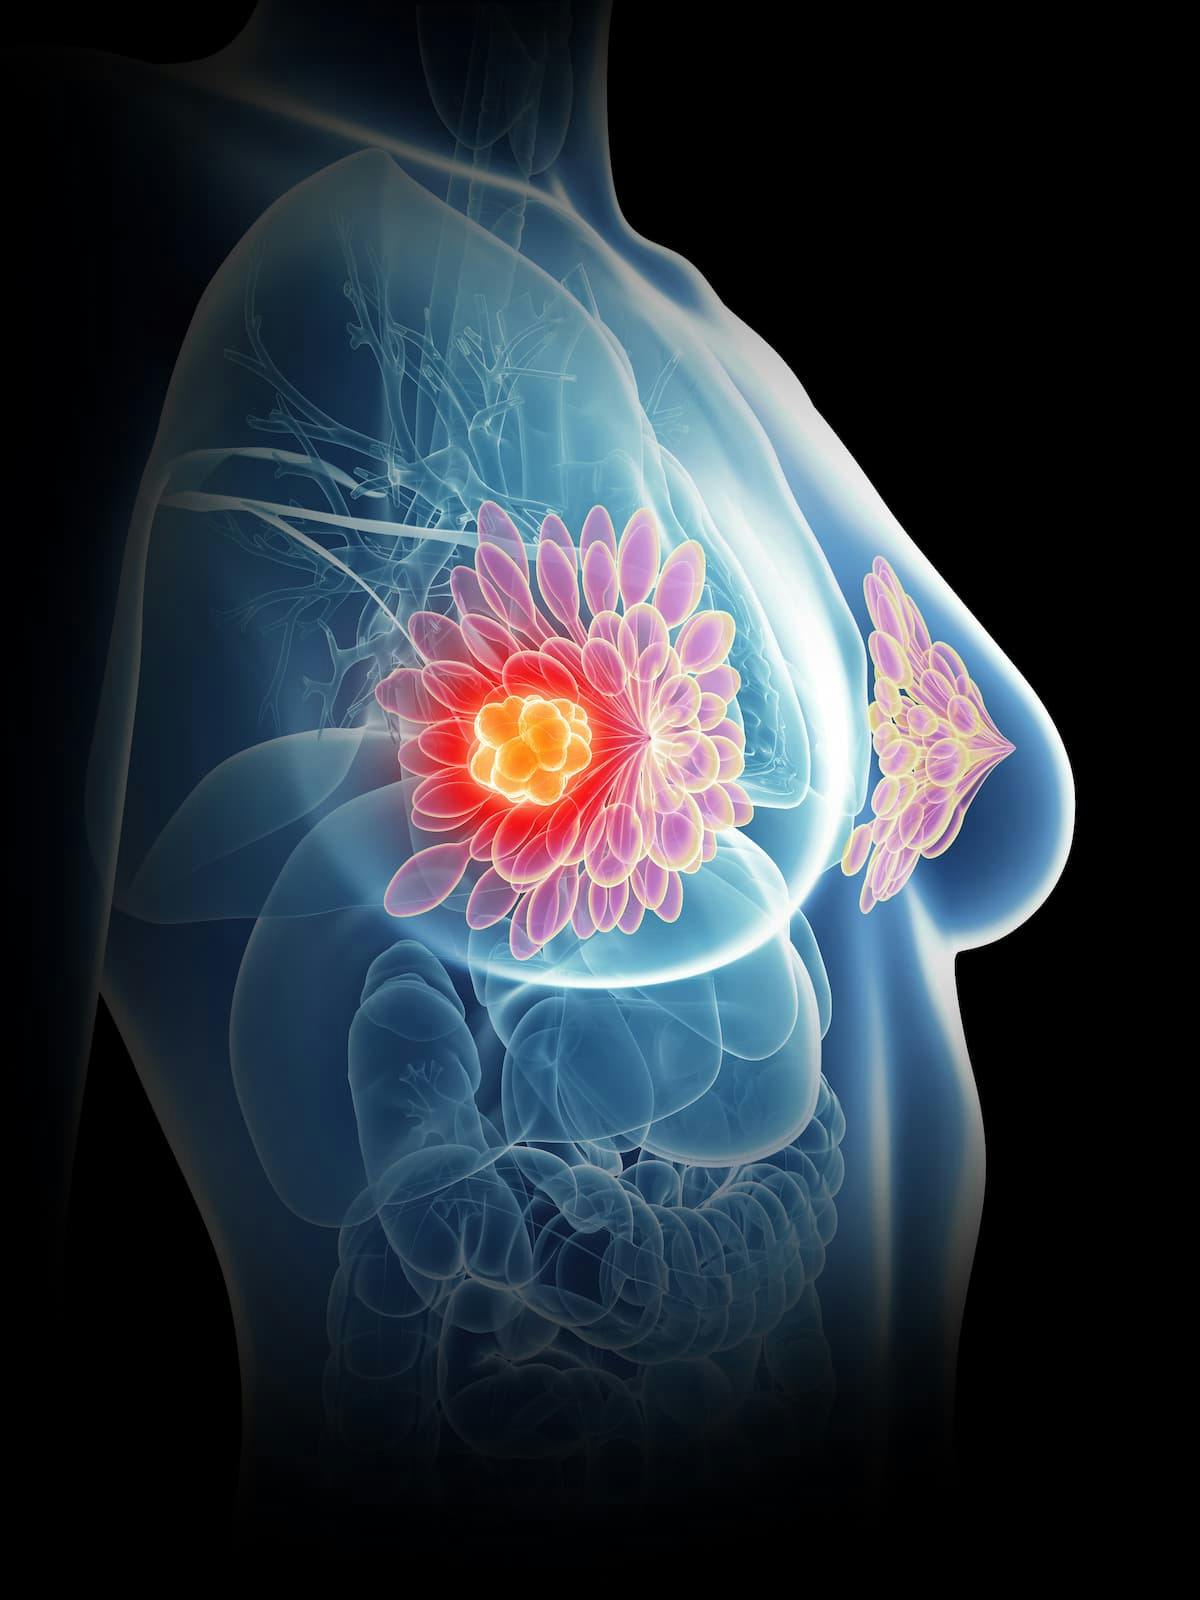 Investigators also report that disease-free survival was not associated with regional node irradiation treatment in favorable-risk, node-positive breast cancer.